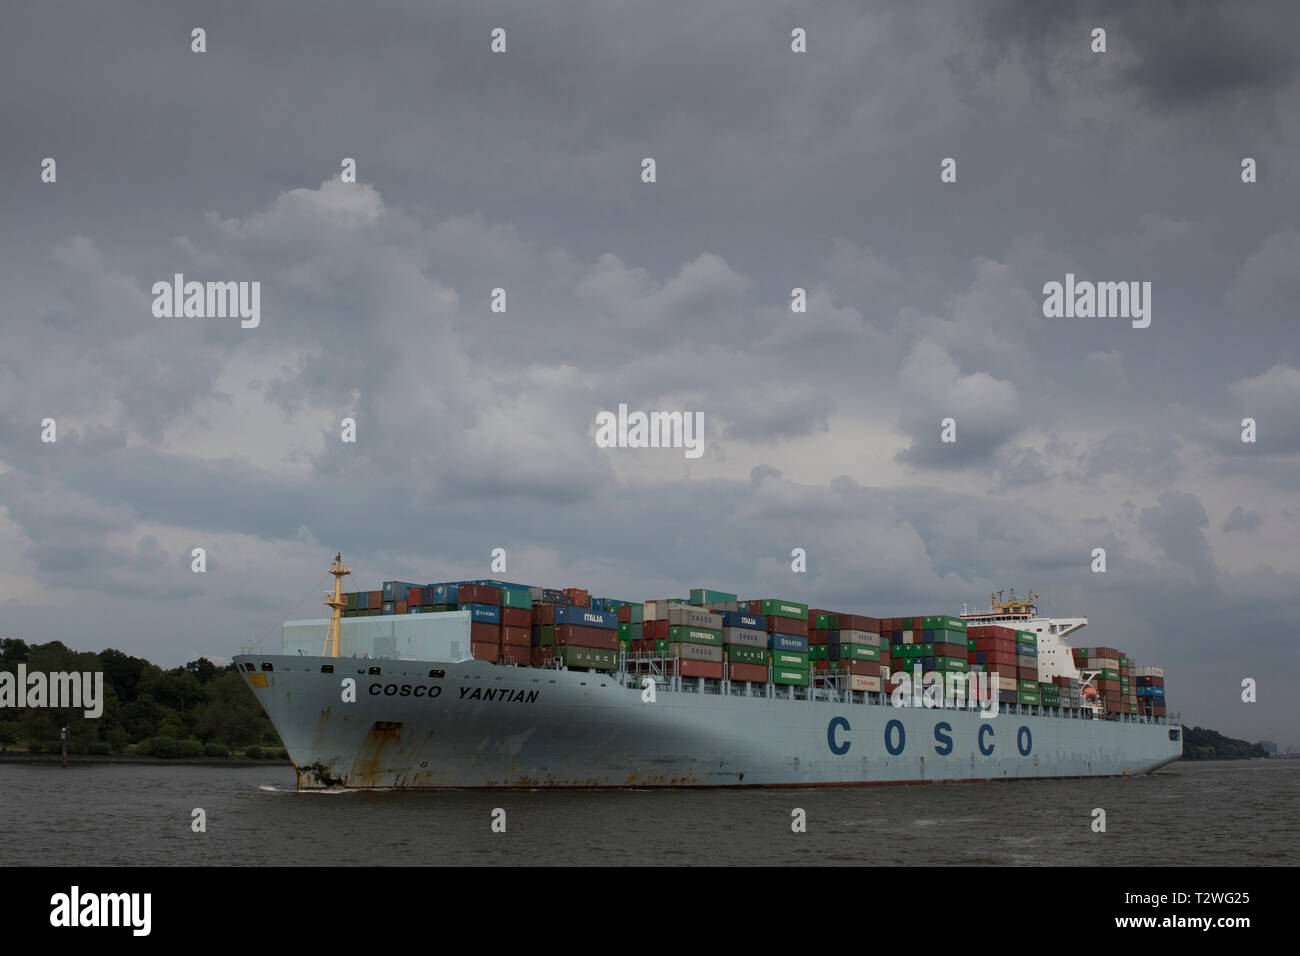 Cosco container ship on the Elbe in Hamburg Germany. Stock Photo